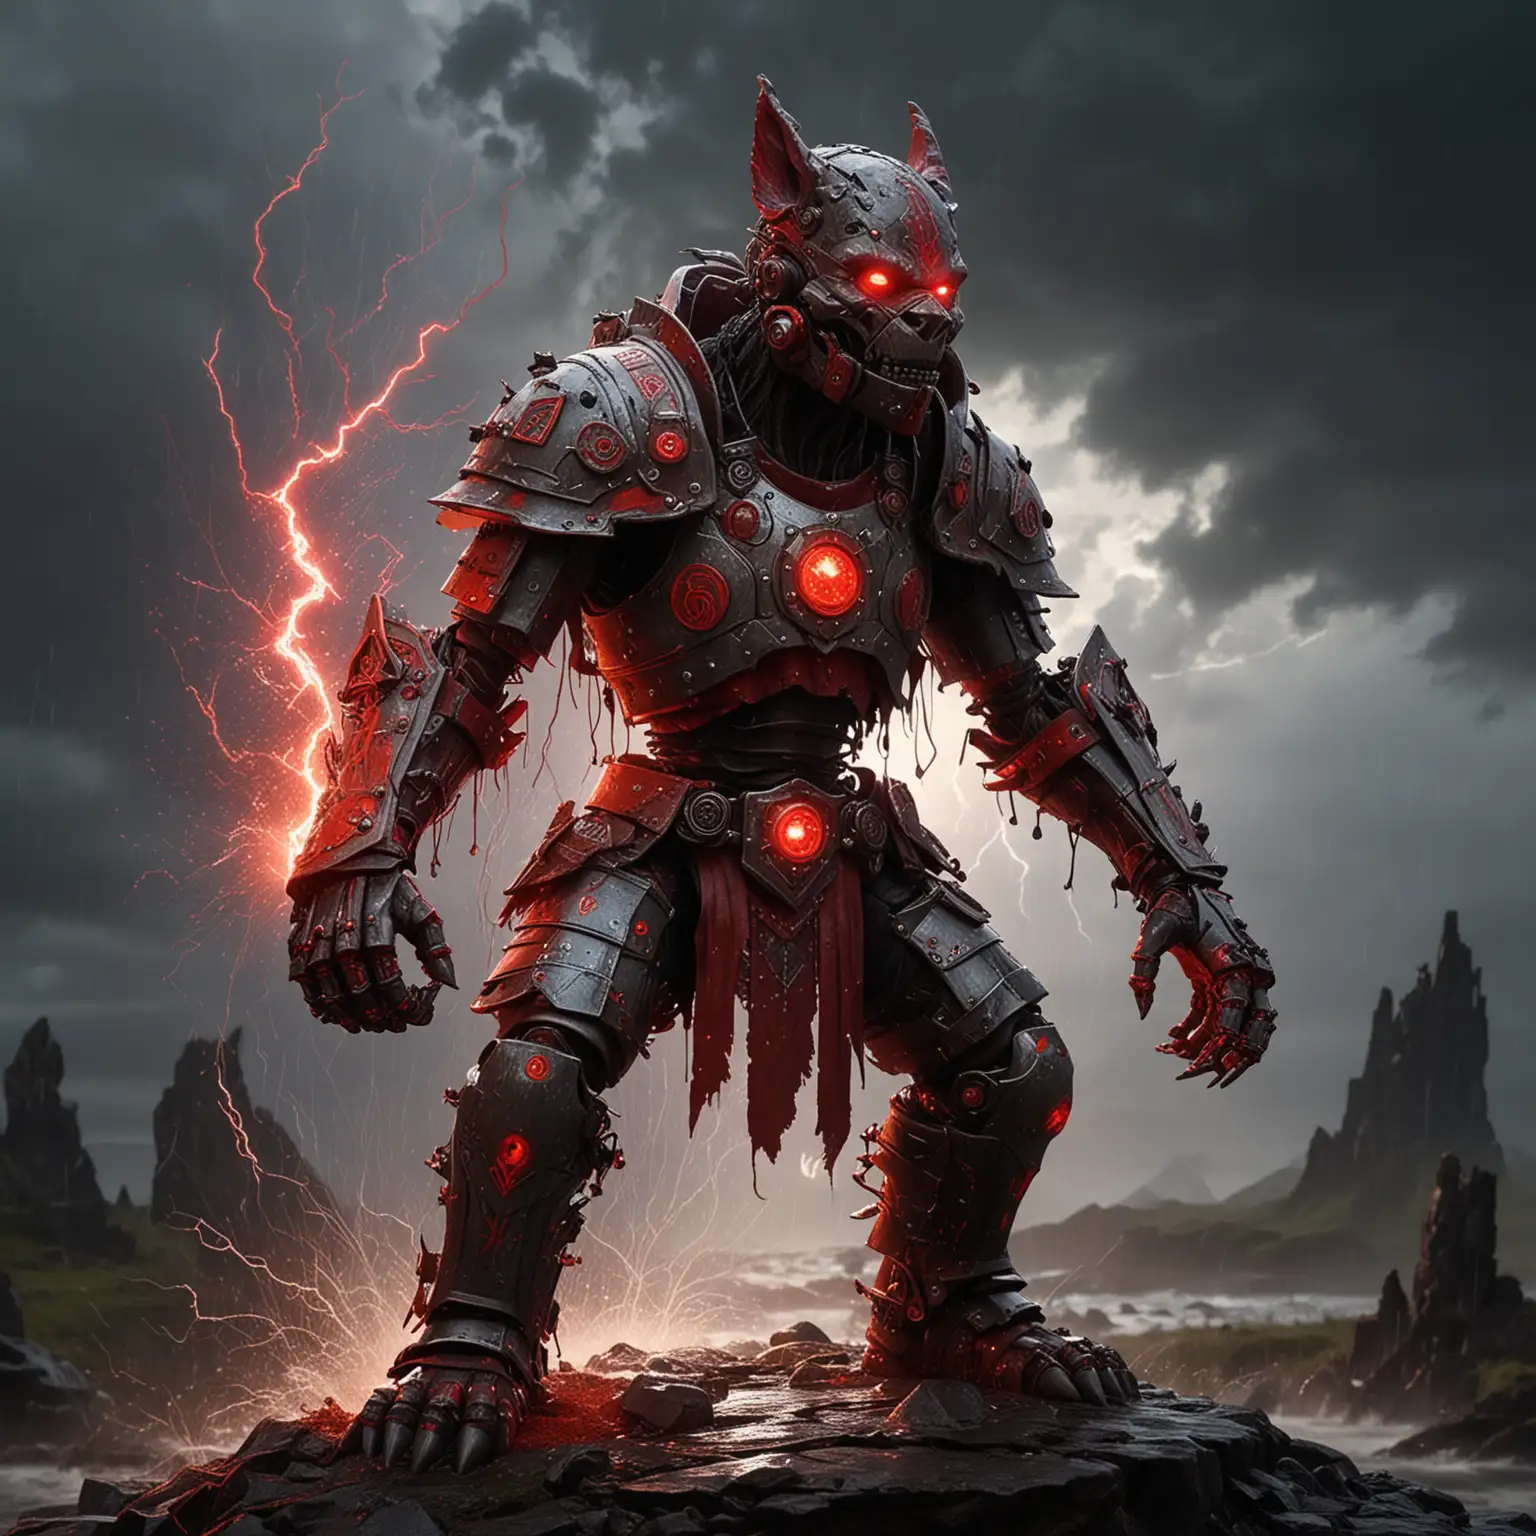 Ethereal Robot WerewolfGnome Cyborg in Blood Magic Armor at Dawn